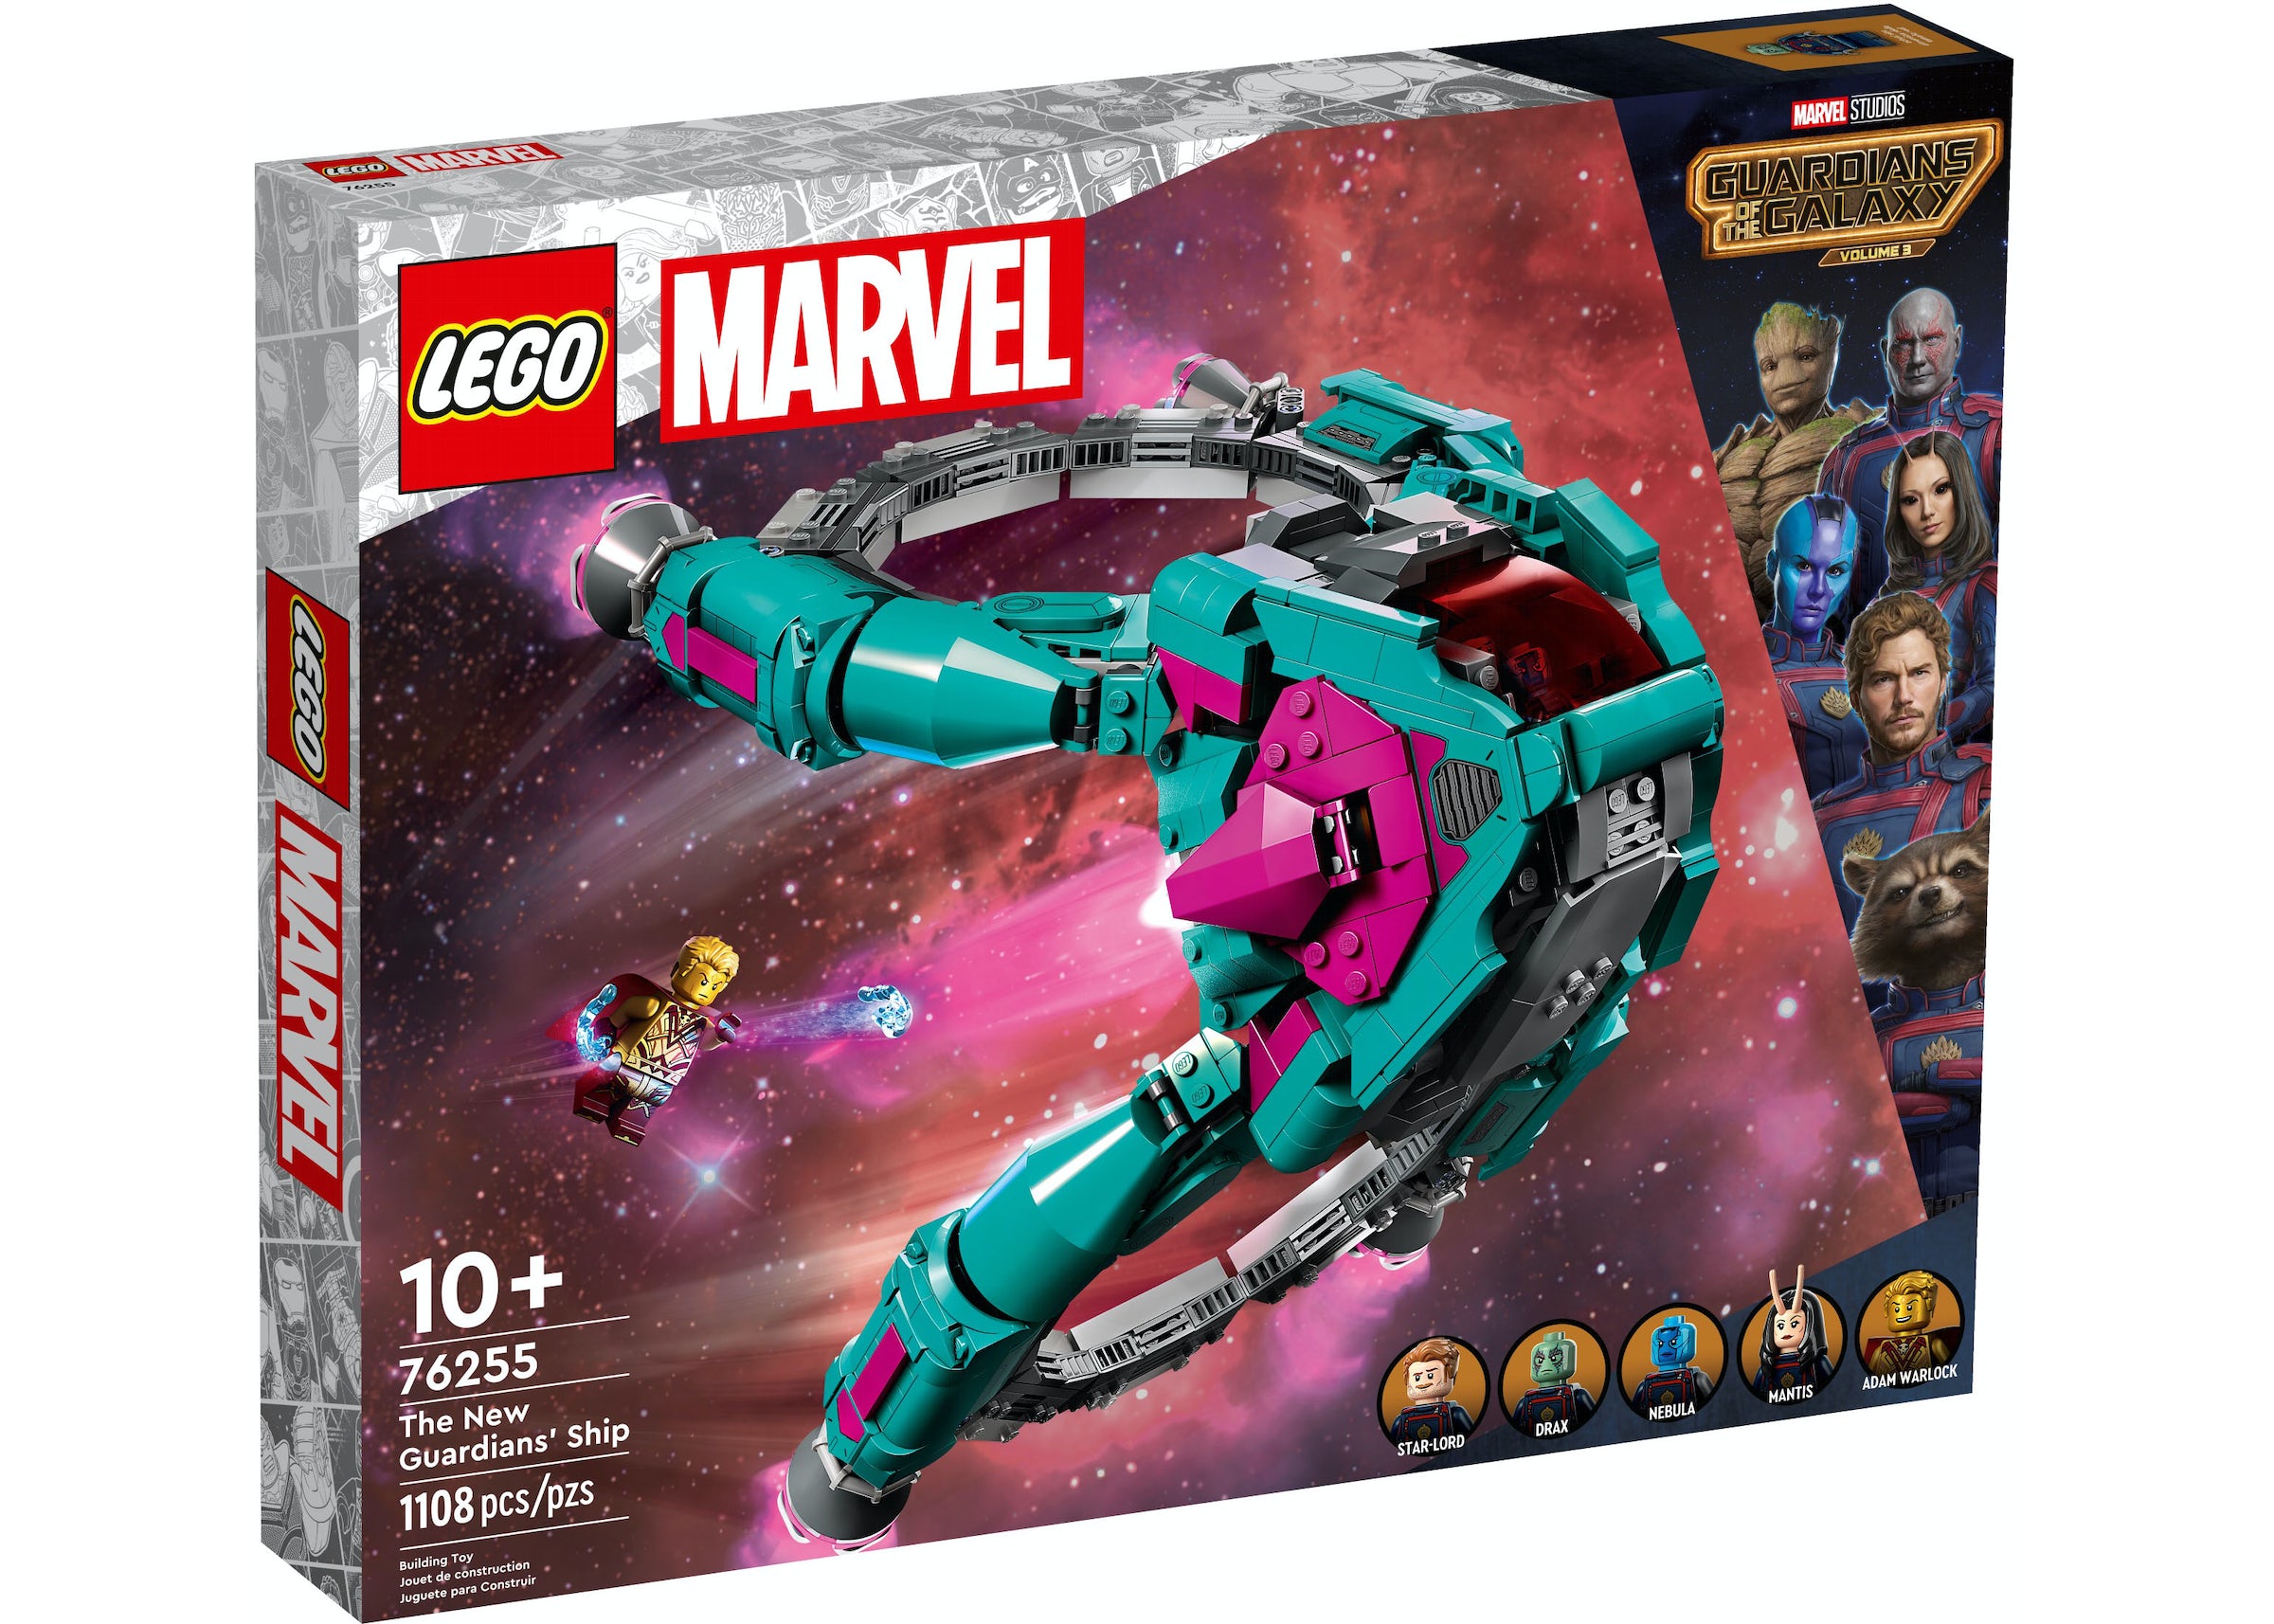 duif kompas Brutaal LEGO Marvel Guardians of the Galaxy Volume 3 The New Guardians' Ship Set  76255 - US